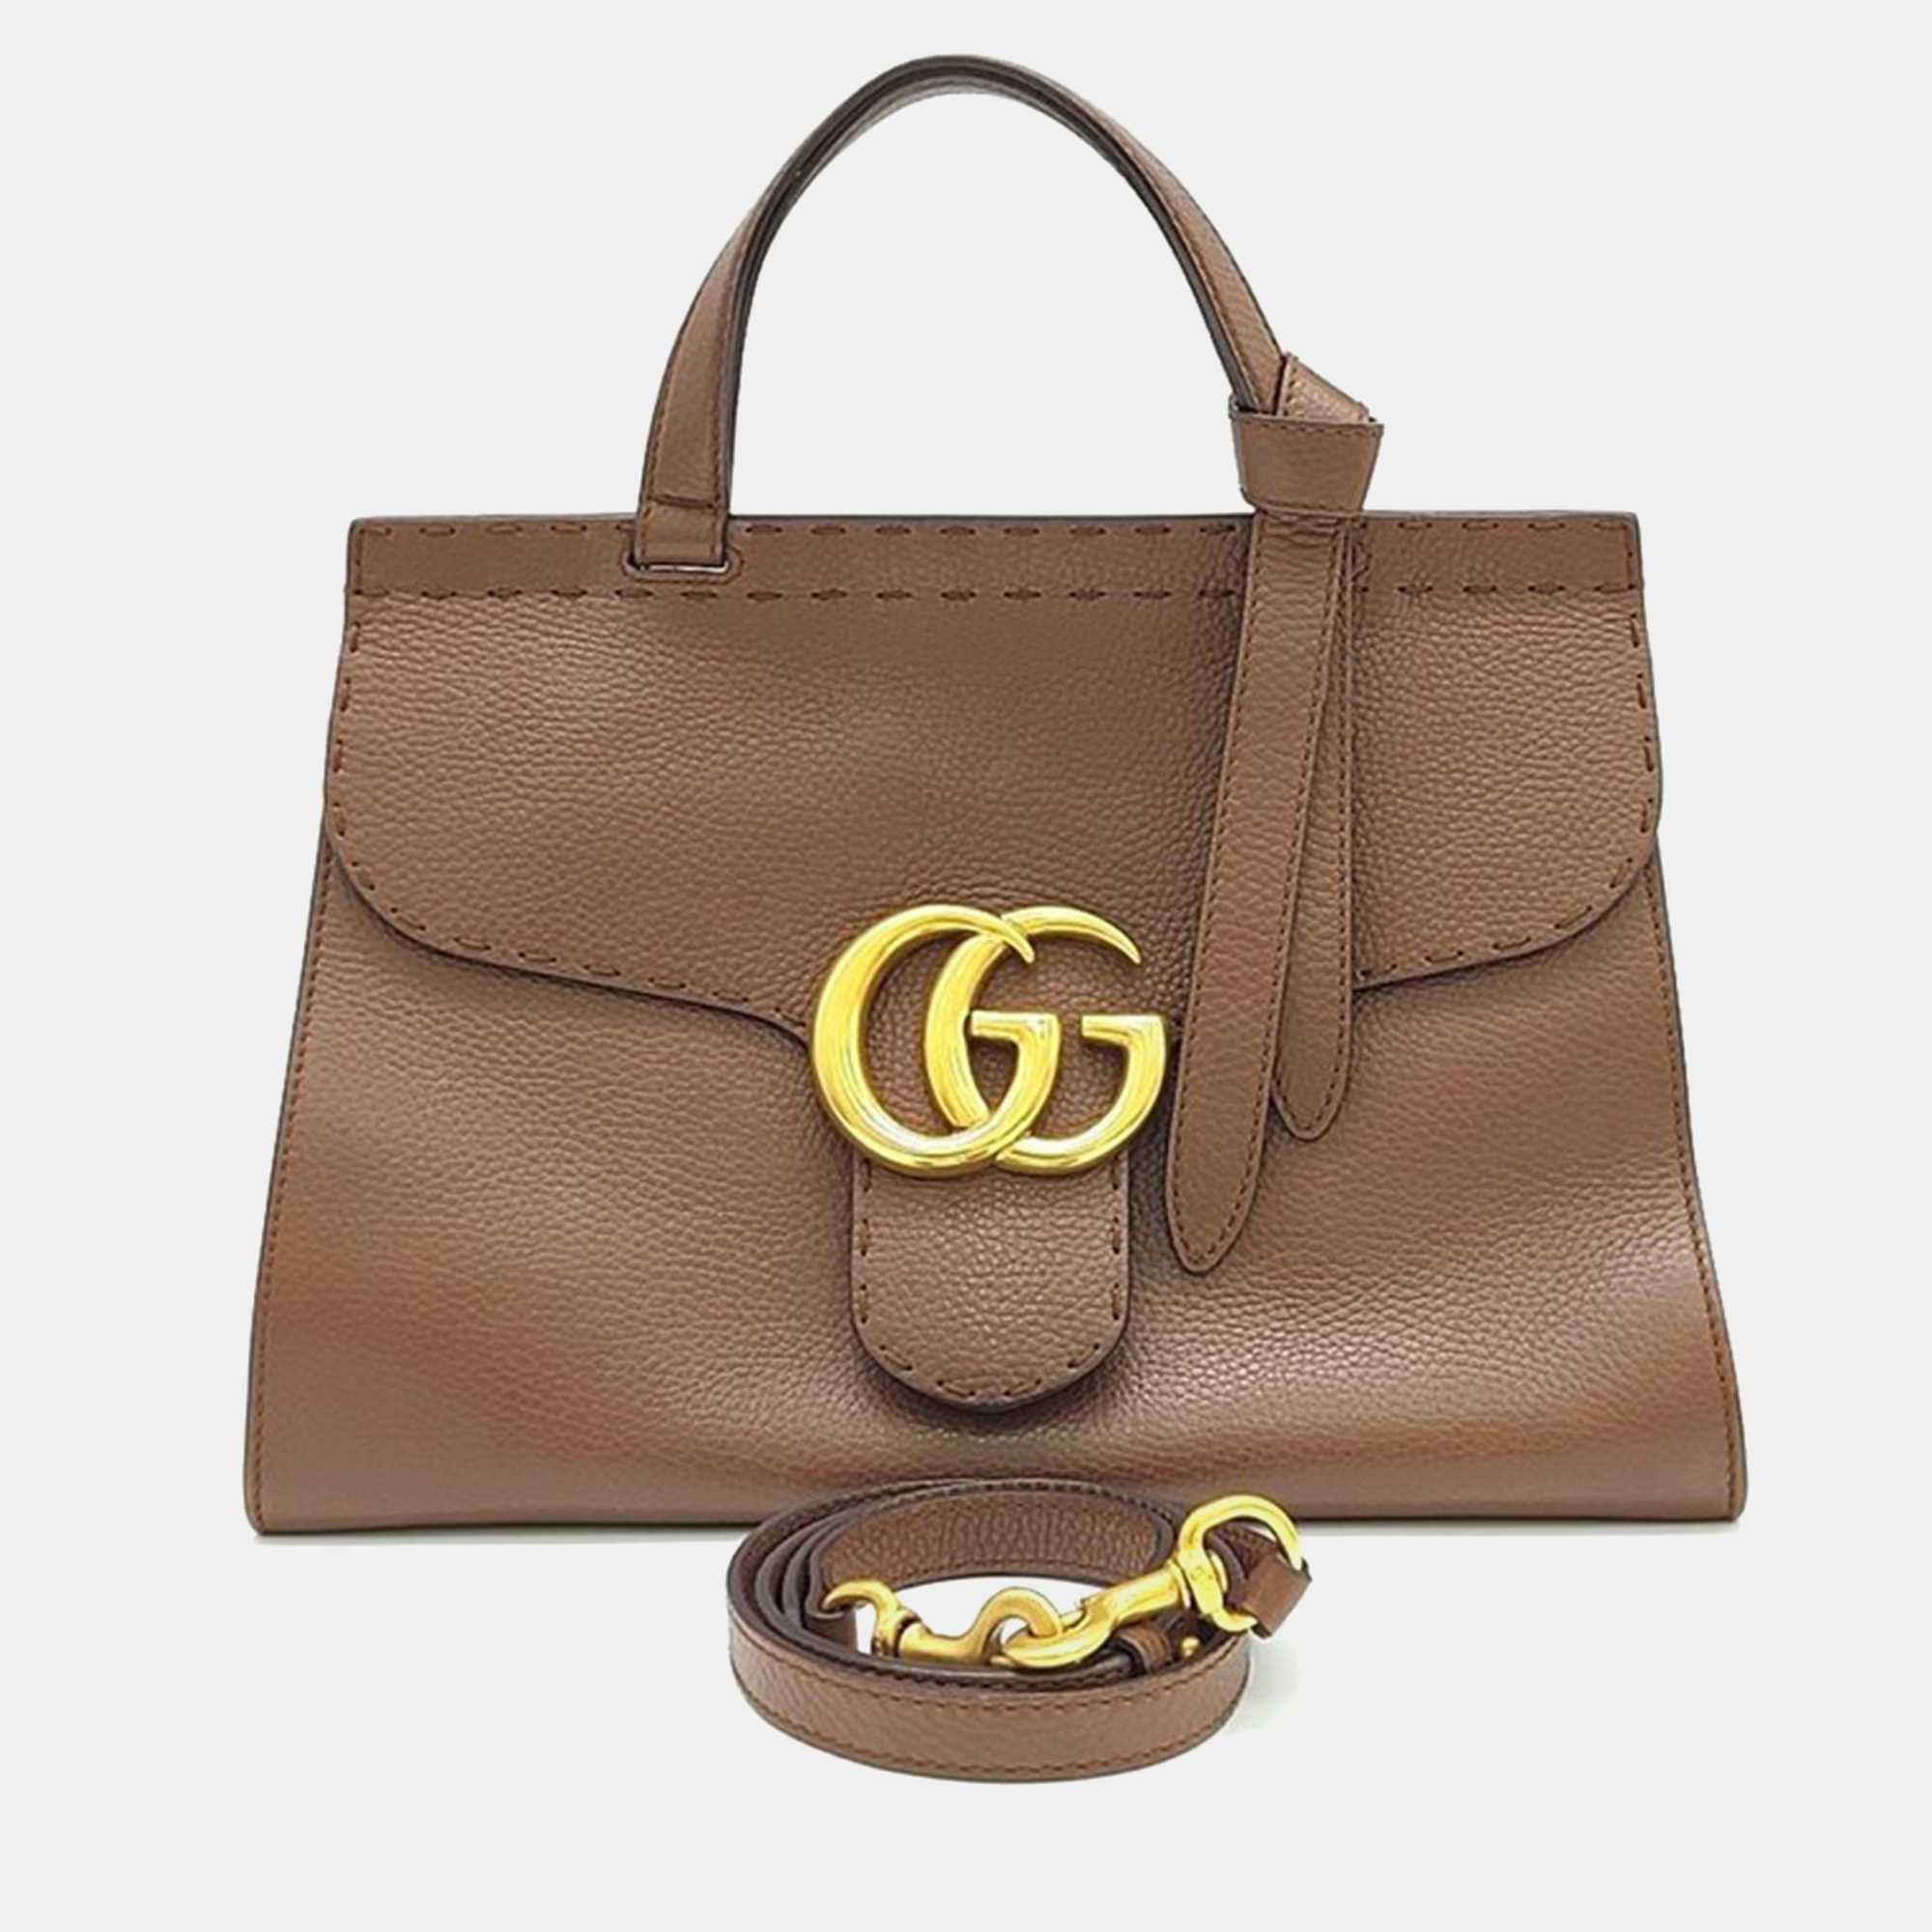 Gucci gg marmont tote and shoulder bag